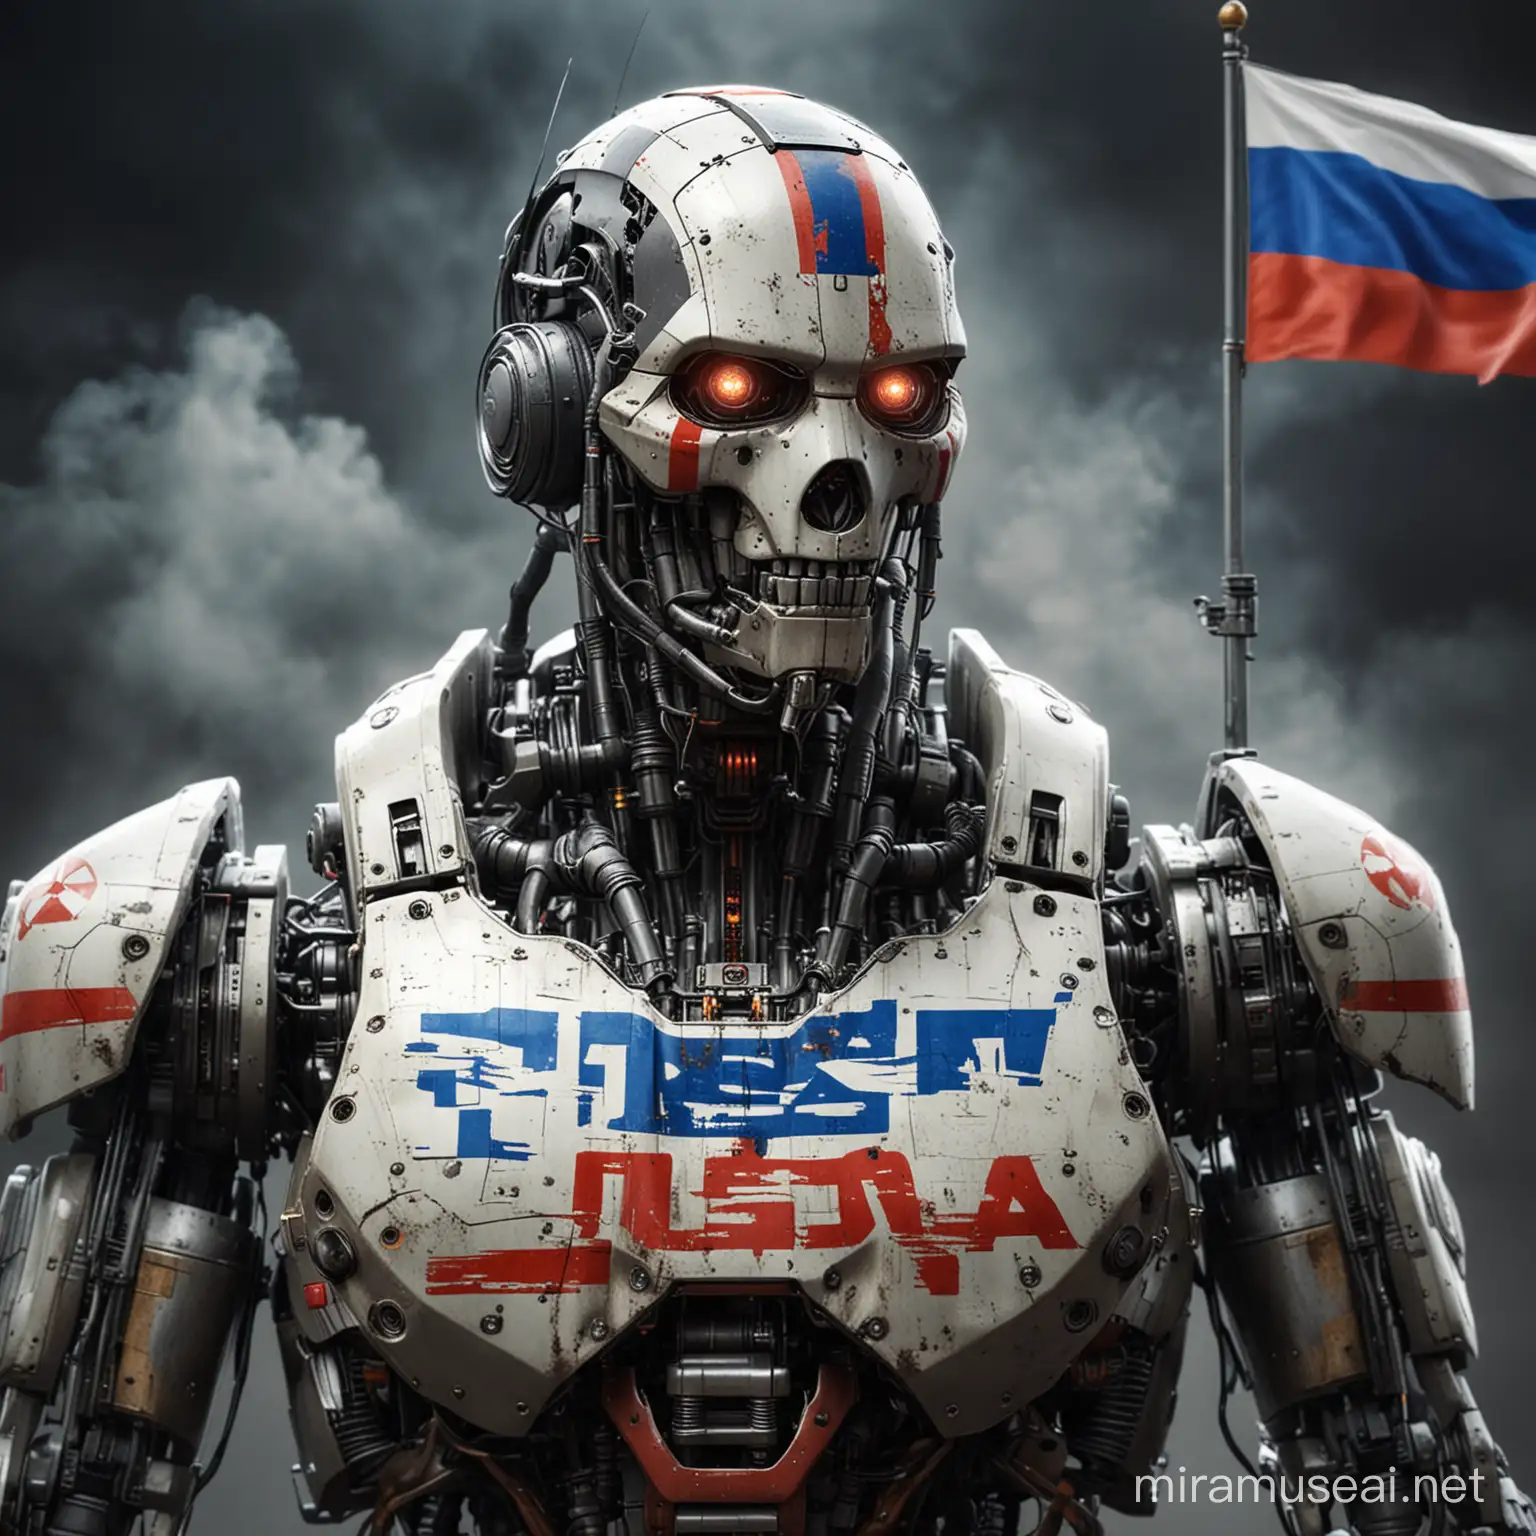 Serious and Dangerous Russian Robot with Rockets and Flag